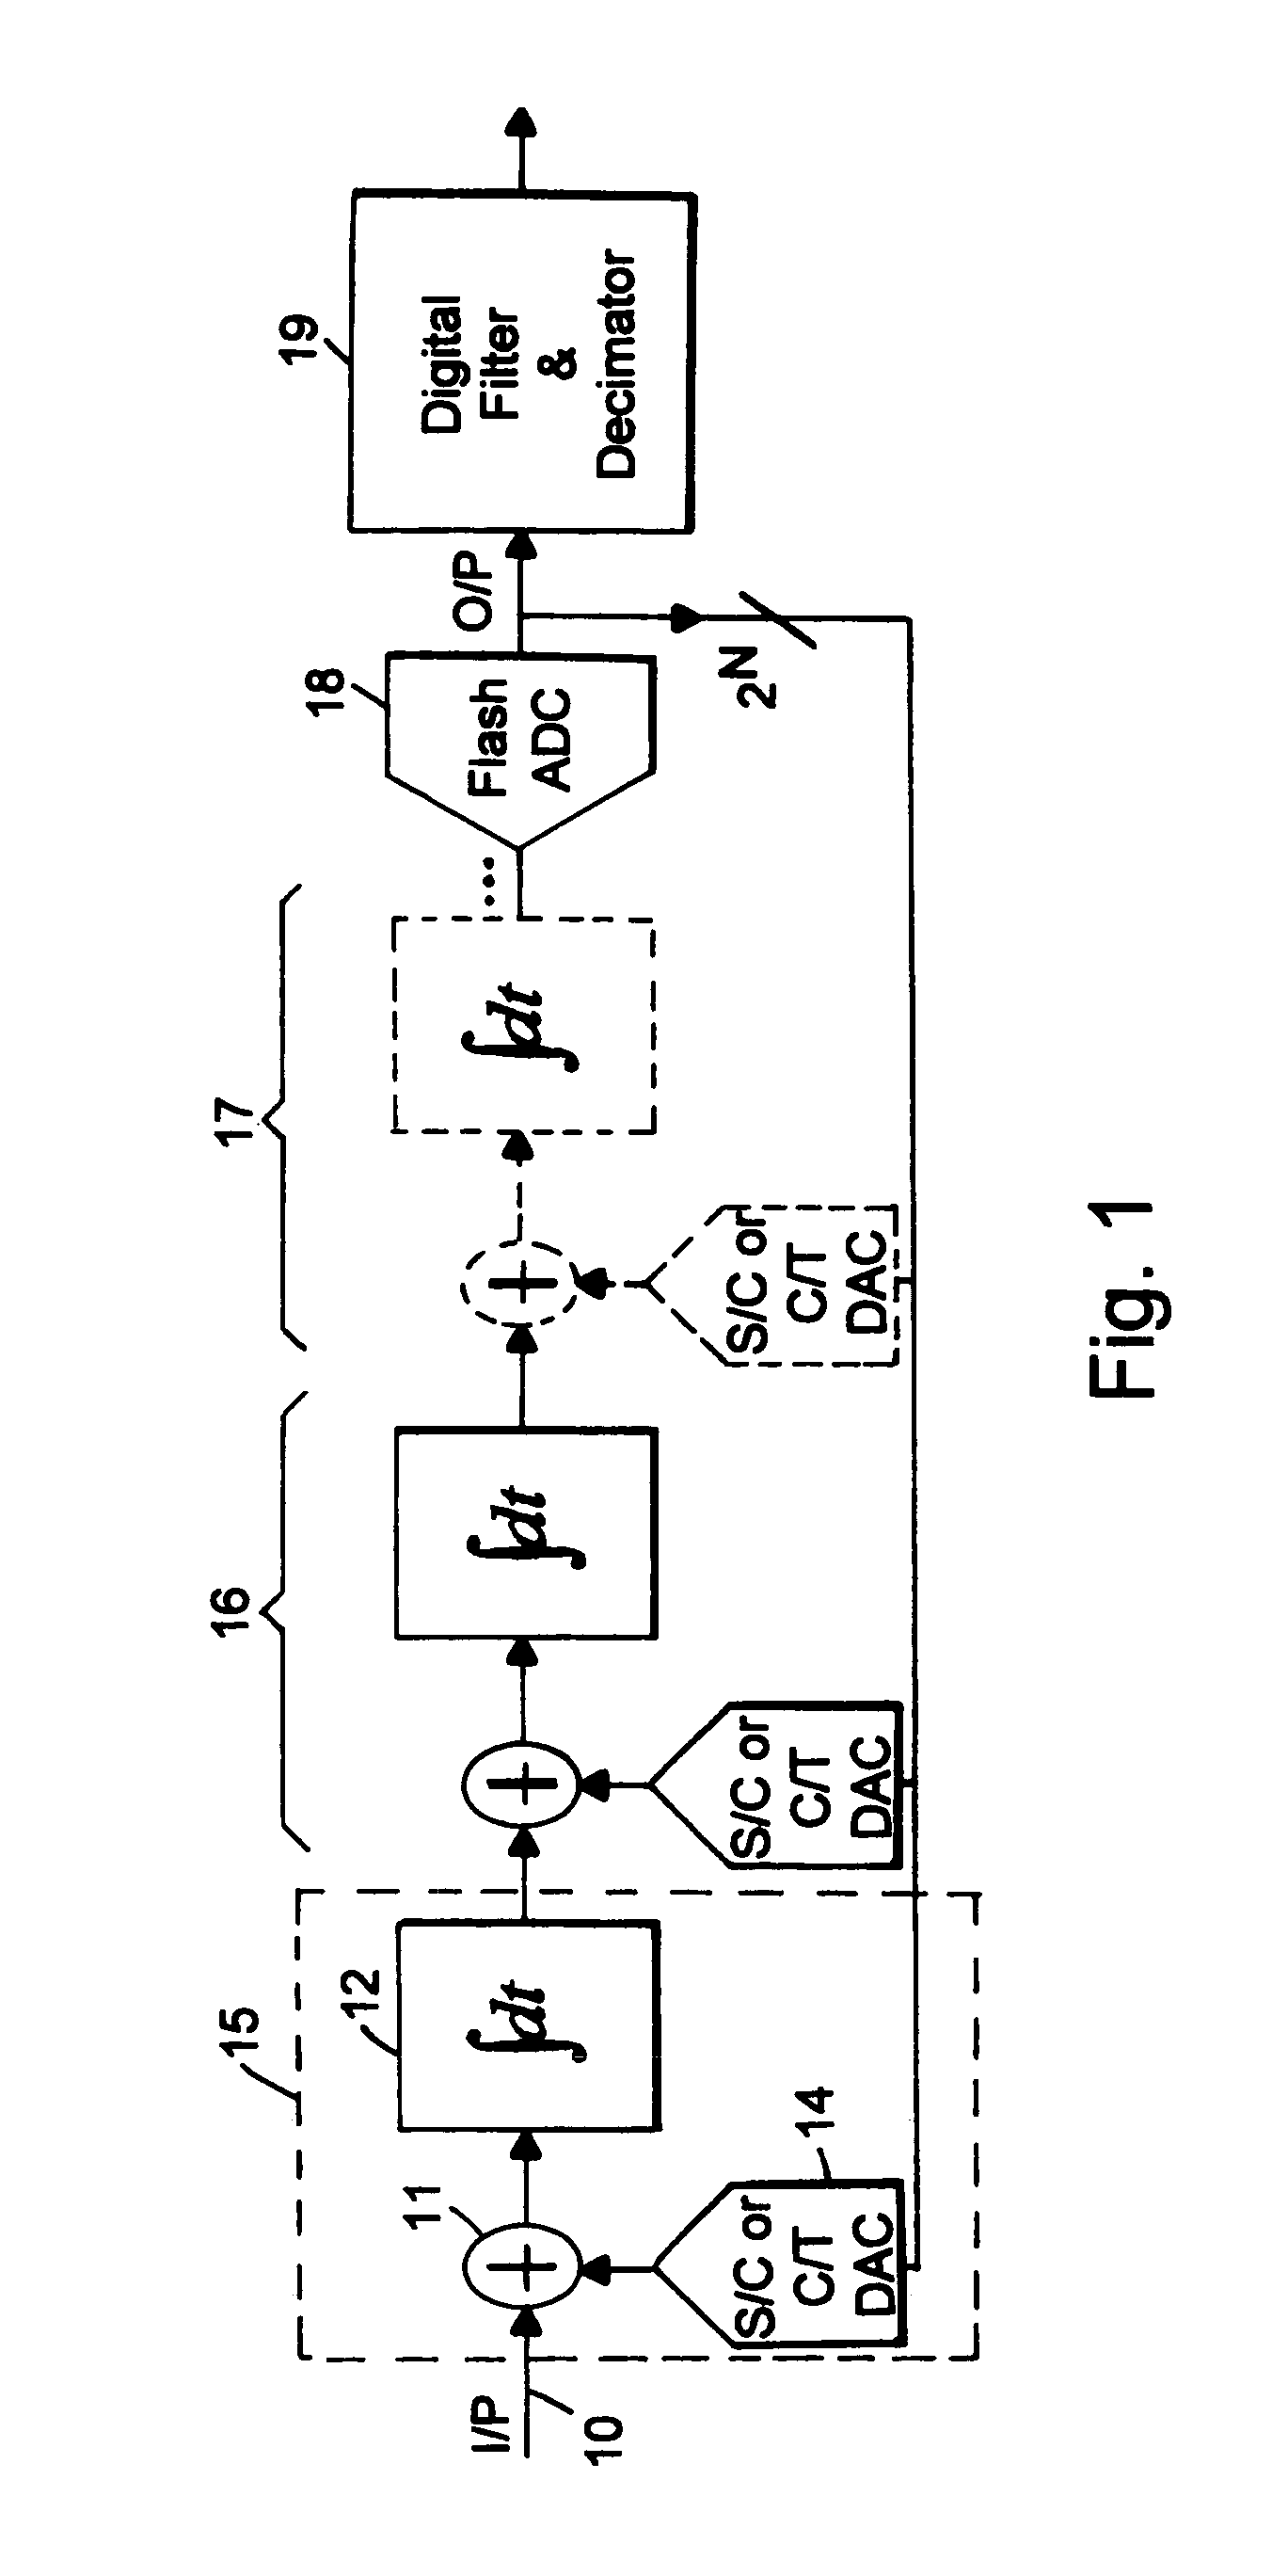 Differential front-end continuous-time sigma-delta ADC using chopper stabilization